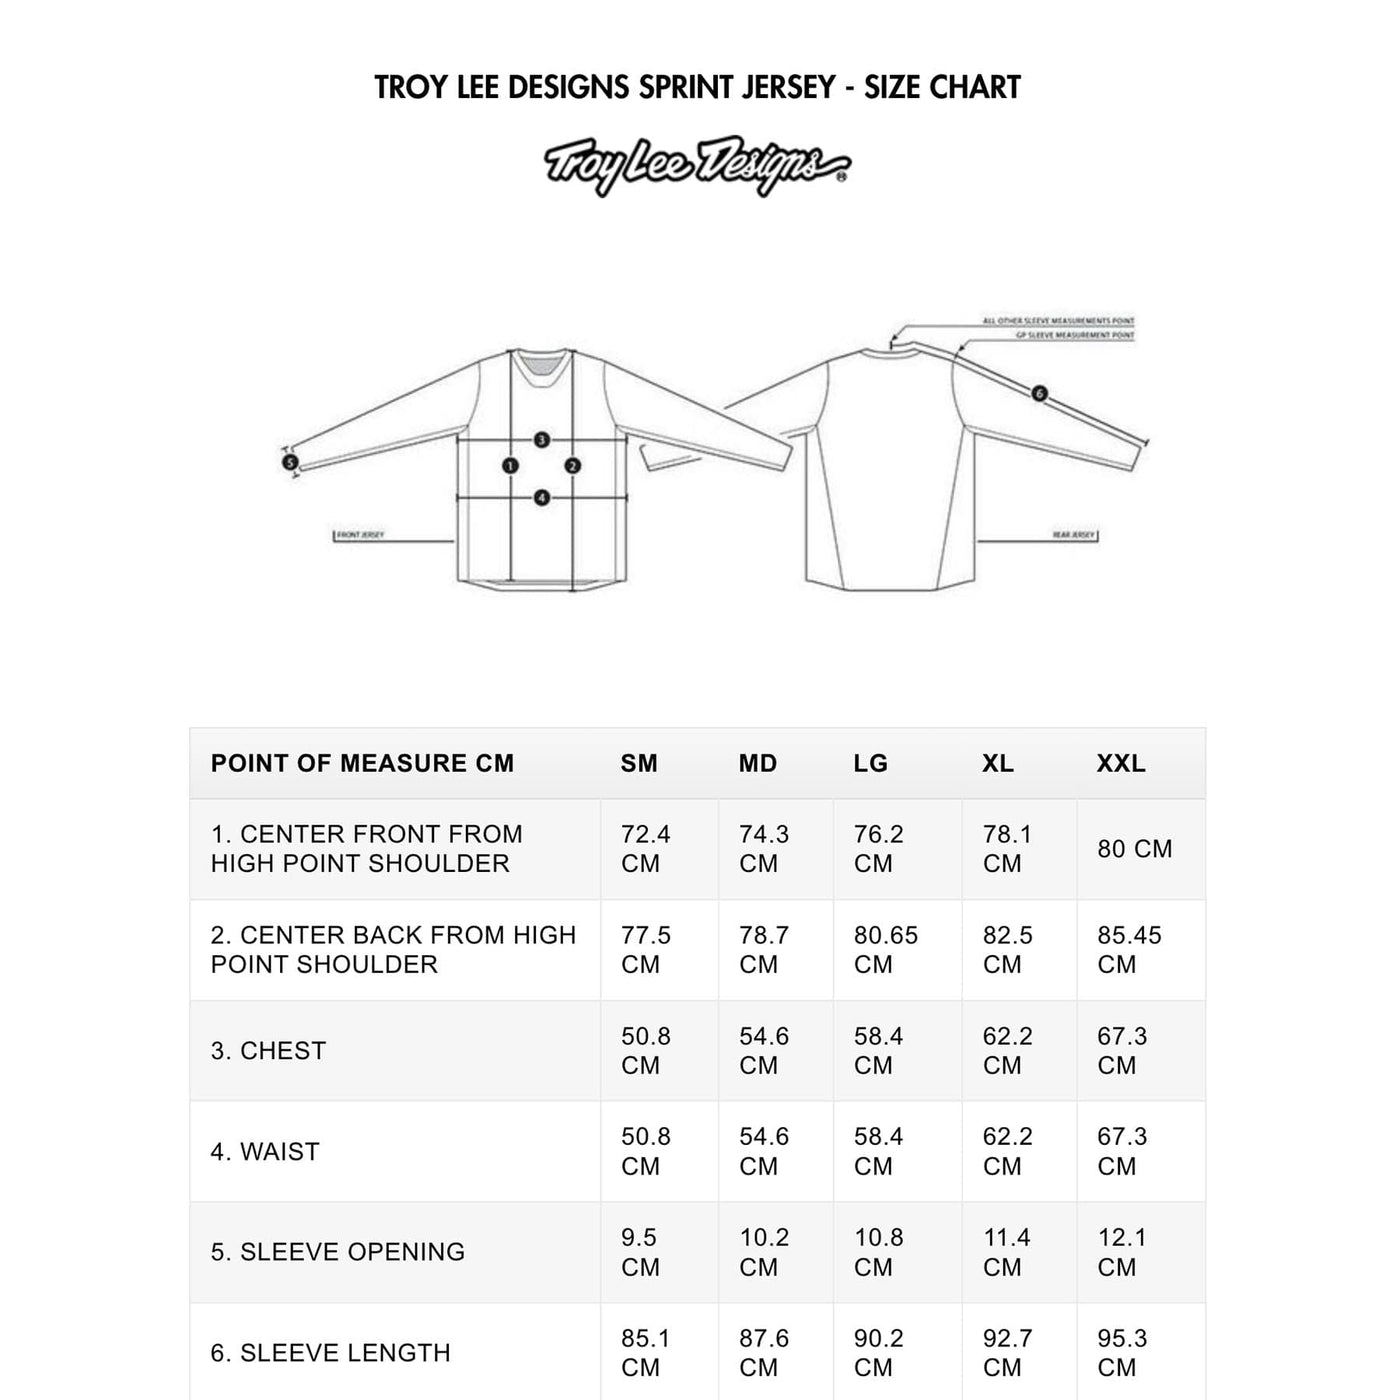 TROY LEE DESIGNS SPRINT JERSEY - SIZE CHART | 8Lines.eu - Fast Shipping!